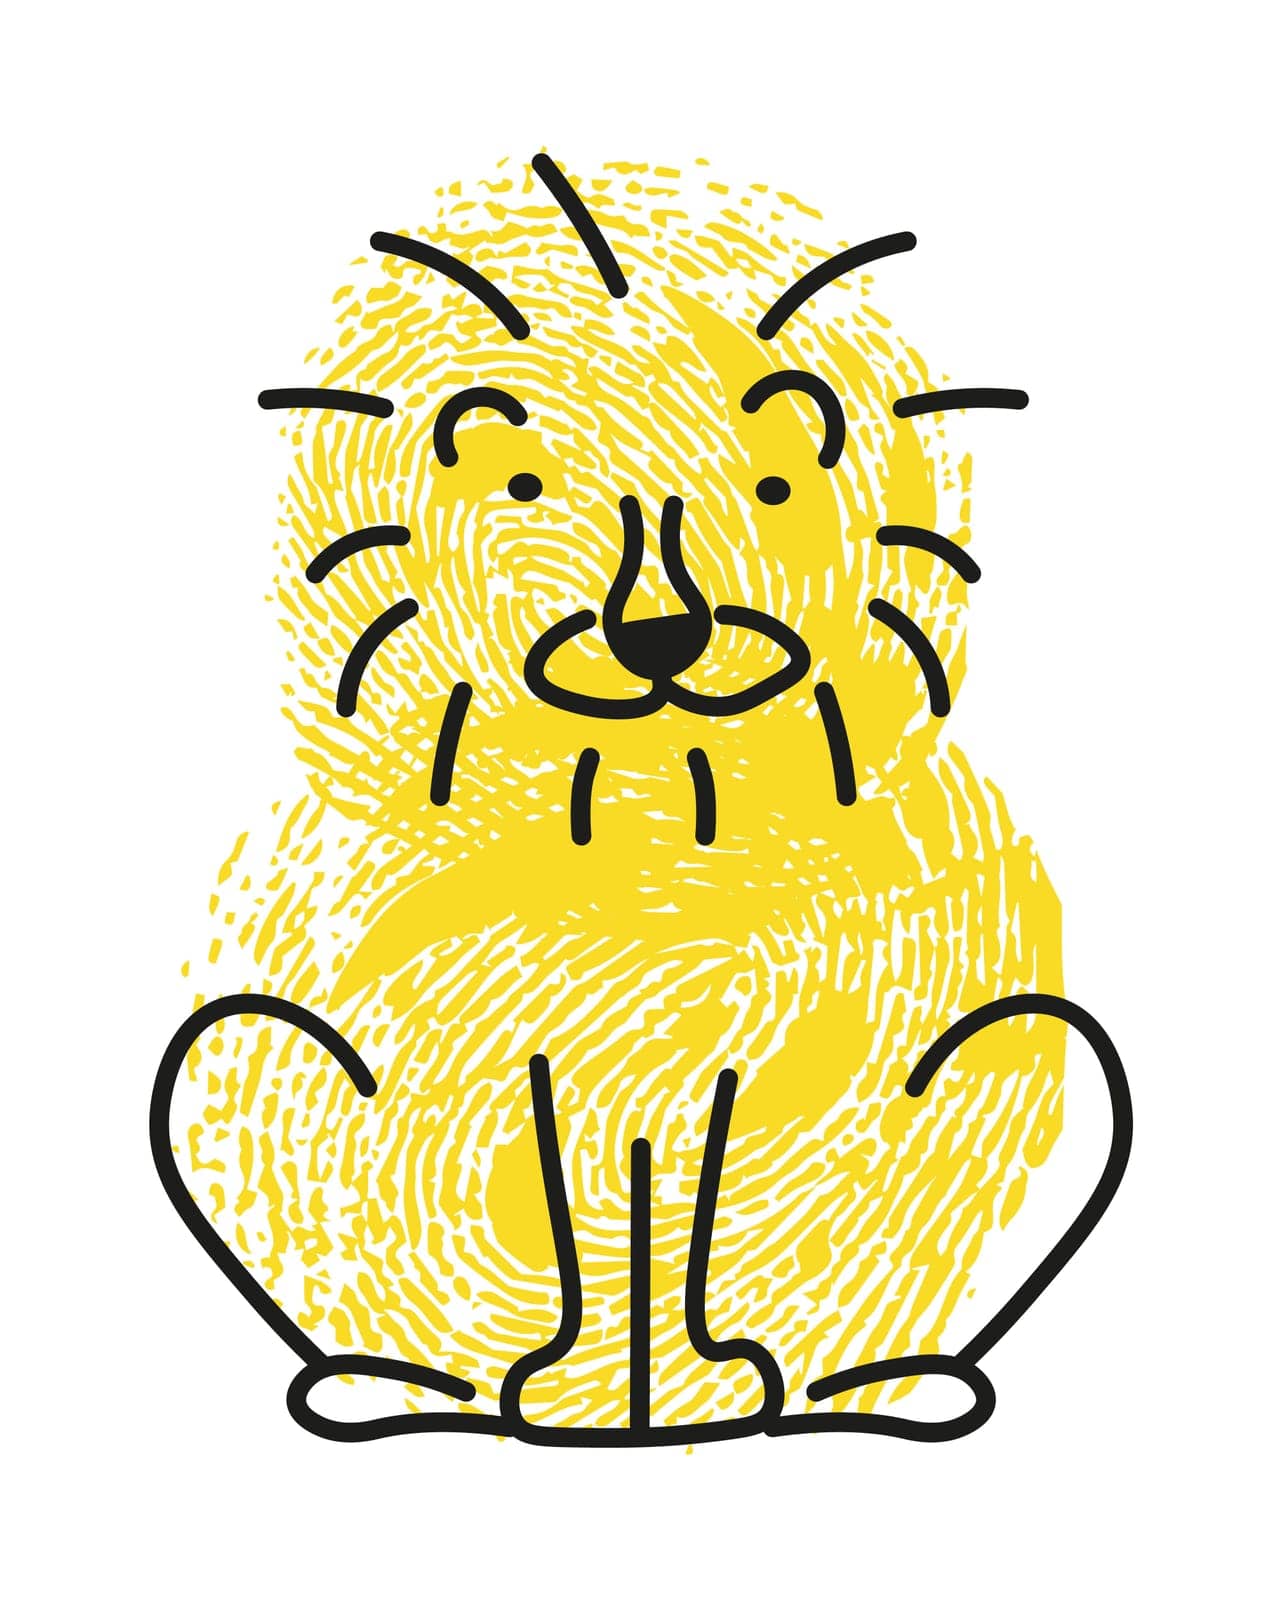 Feline animal thumbprint, isolated portrait of lion with hairy head coat. Cute personage living in pride, shaggy mane of mammal. Simple drawing of character with finger stamp, vector in flat style